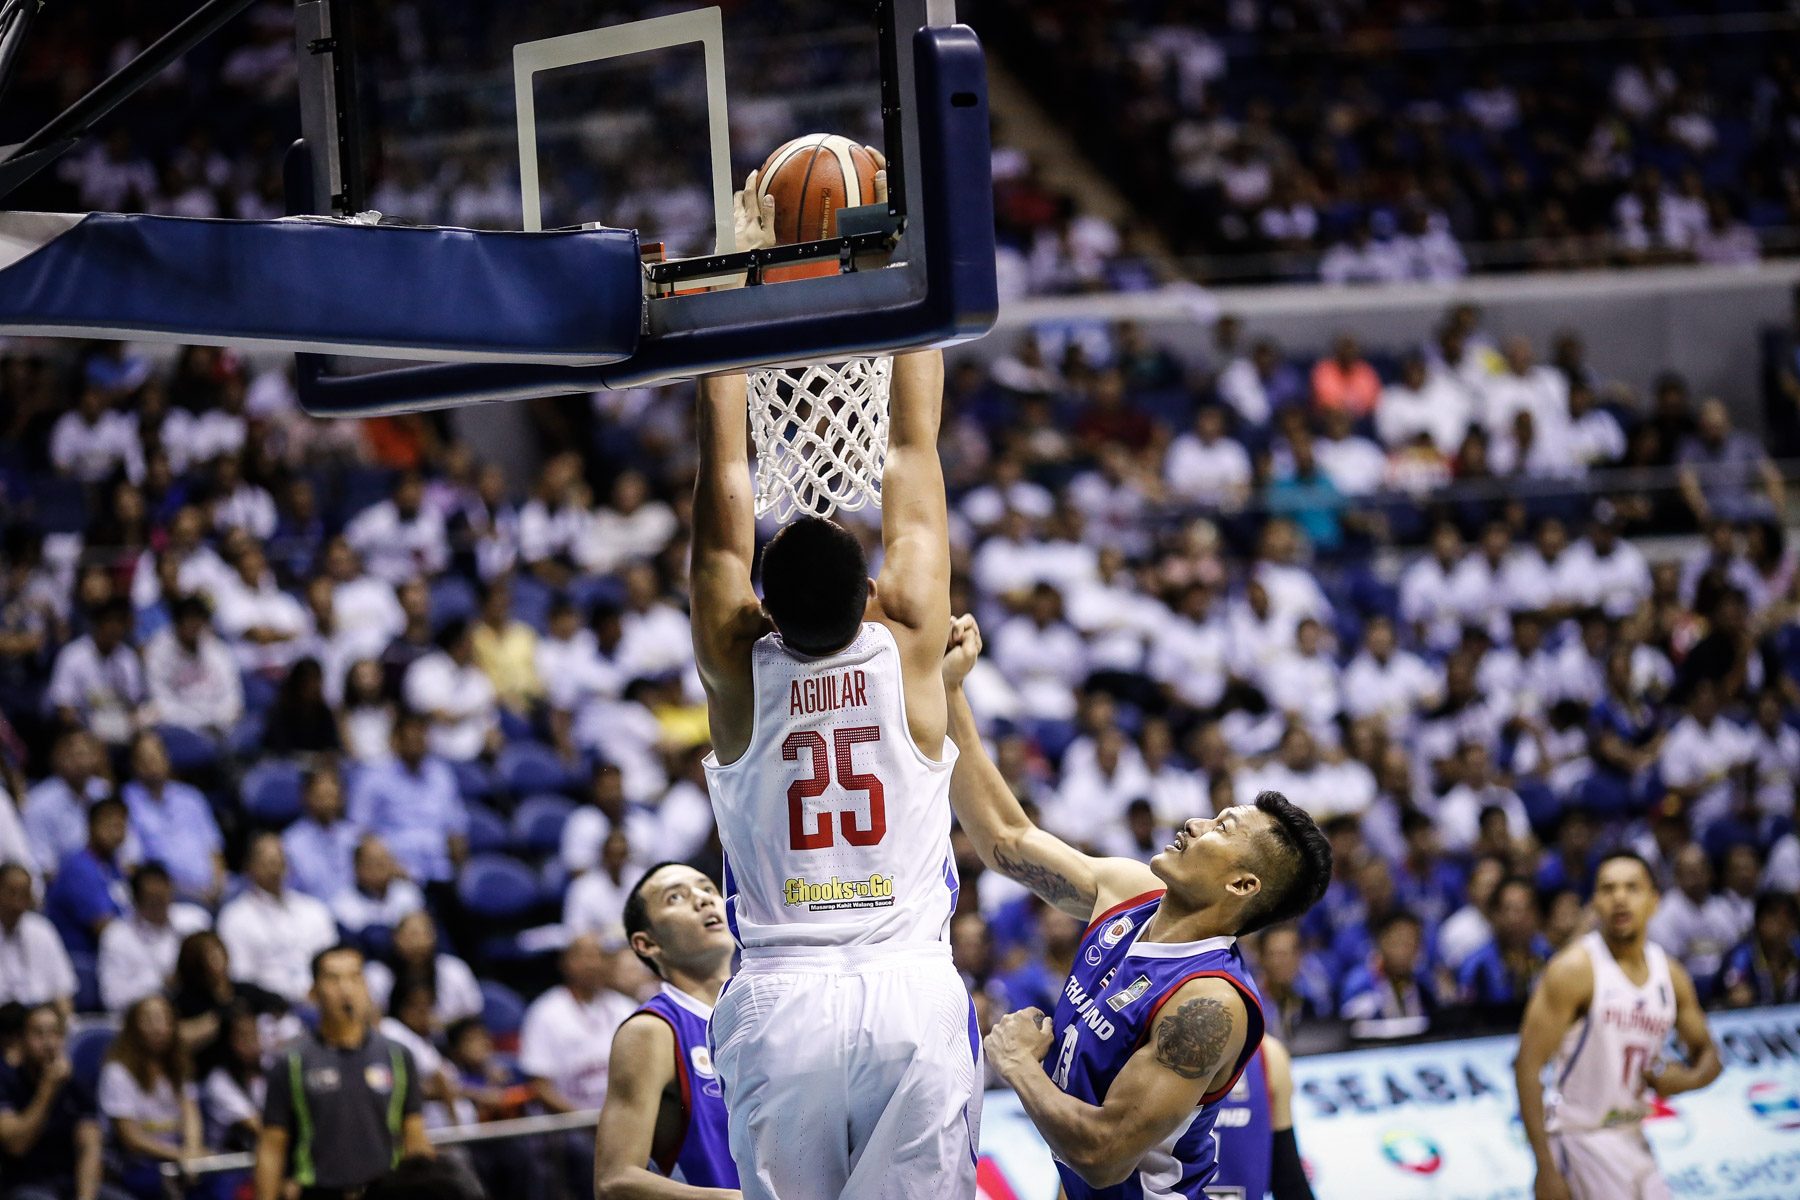 Reyes lauds Aguilar’s maturity with Gilas over the years